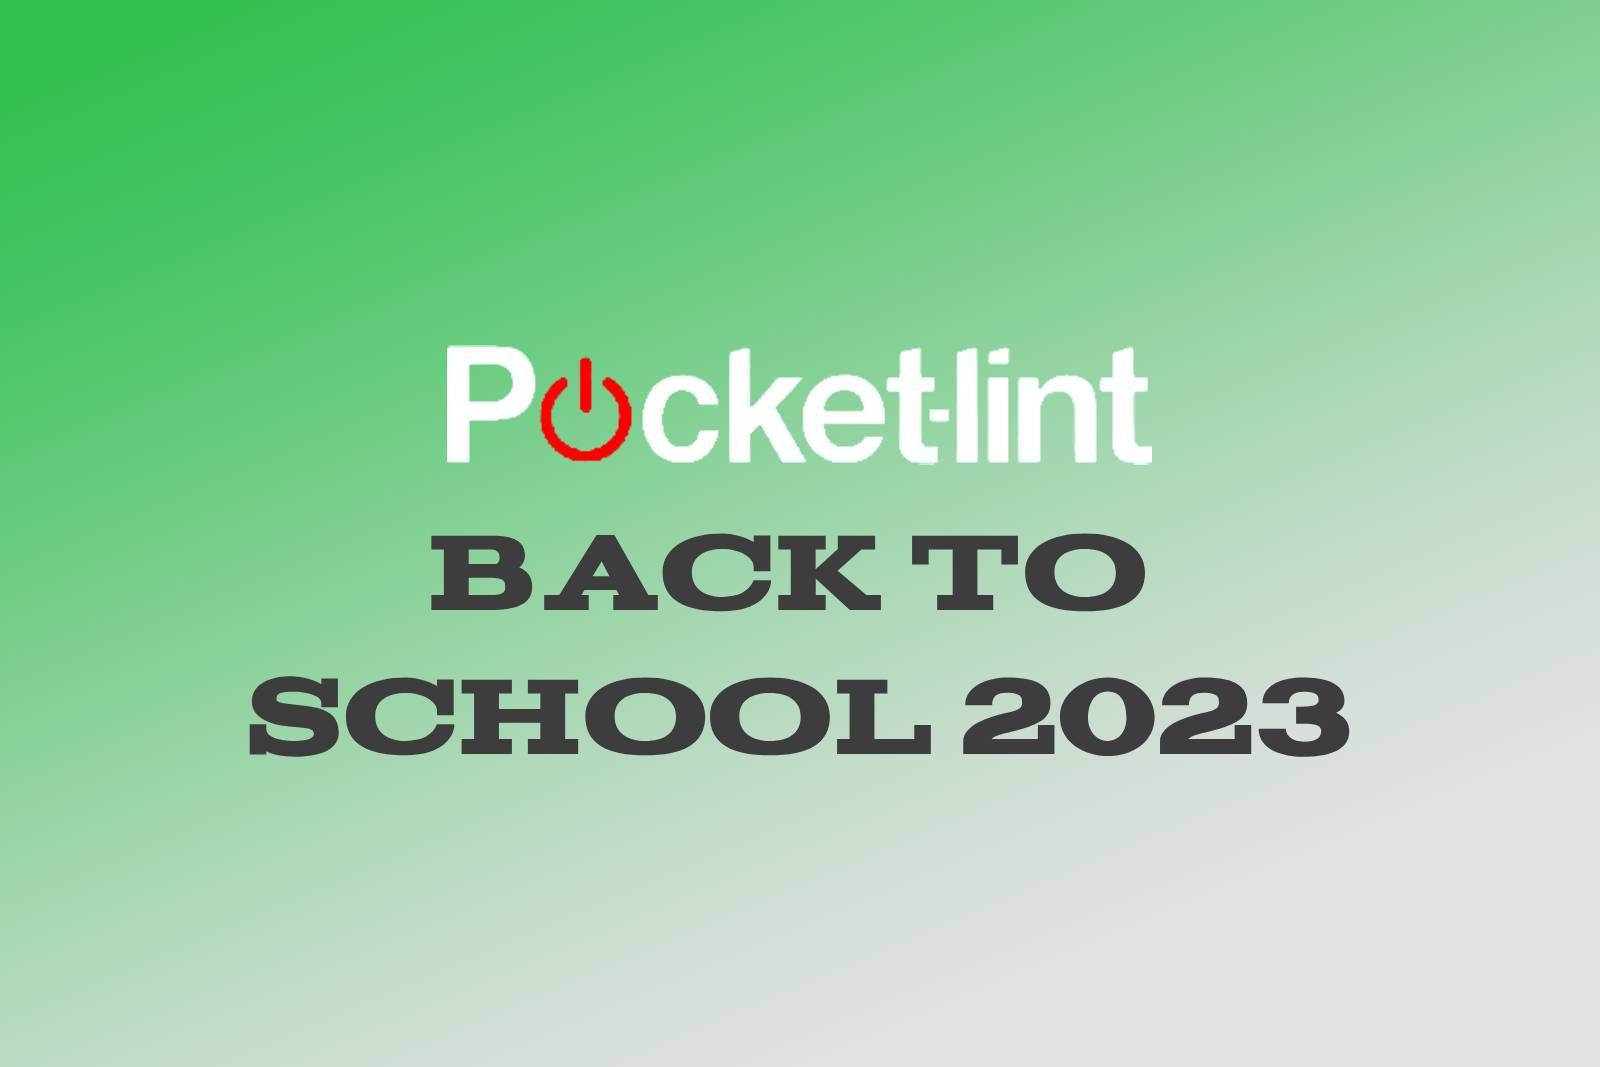 Back to School 2023: Here are the best deals you can't miss